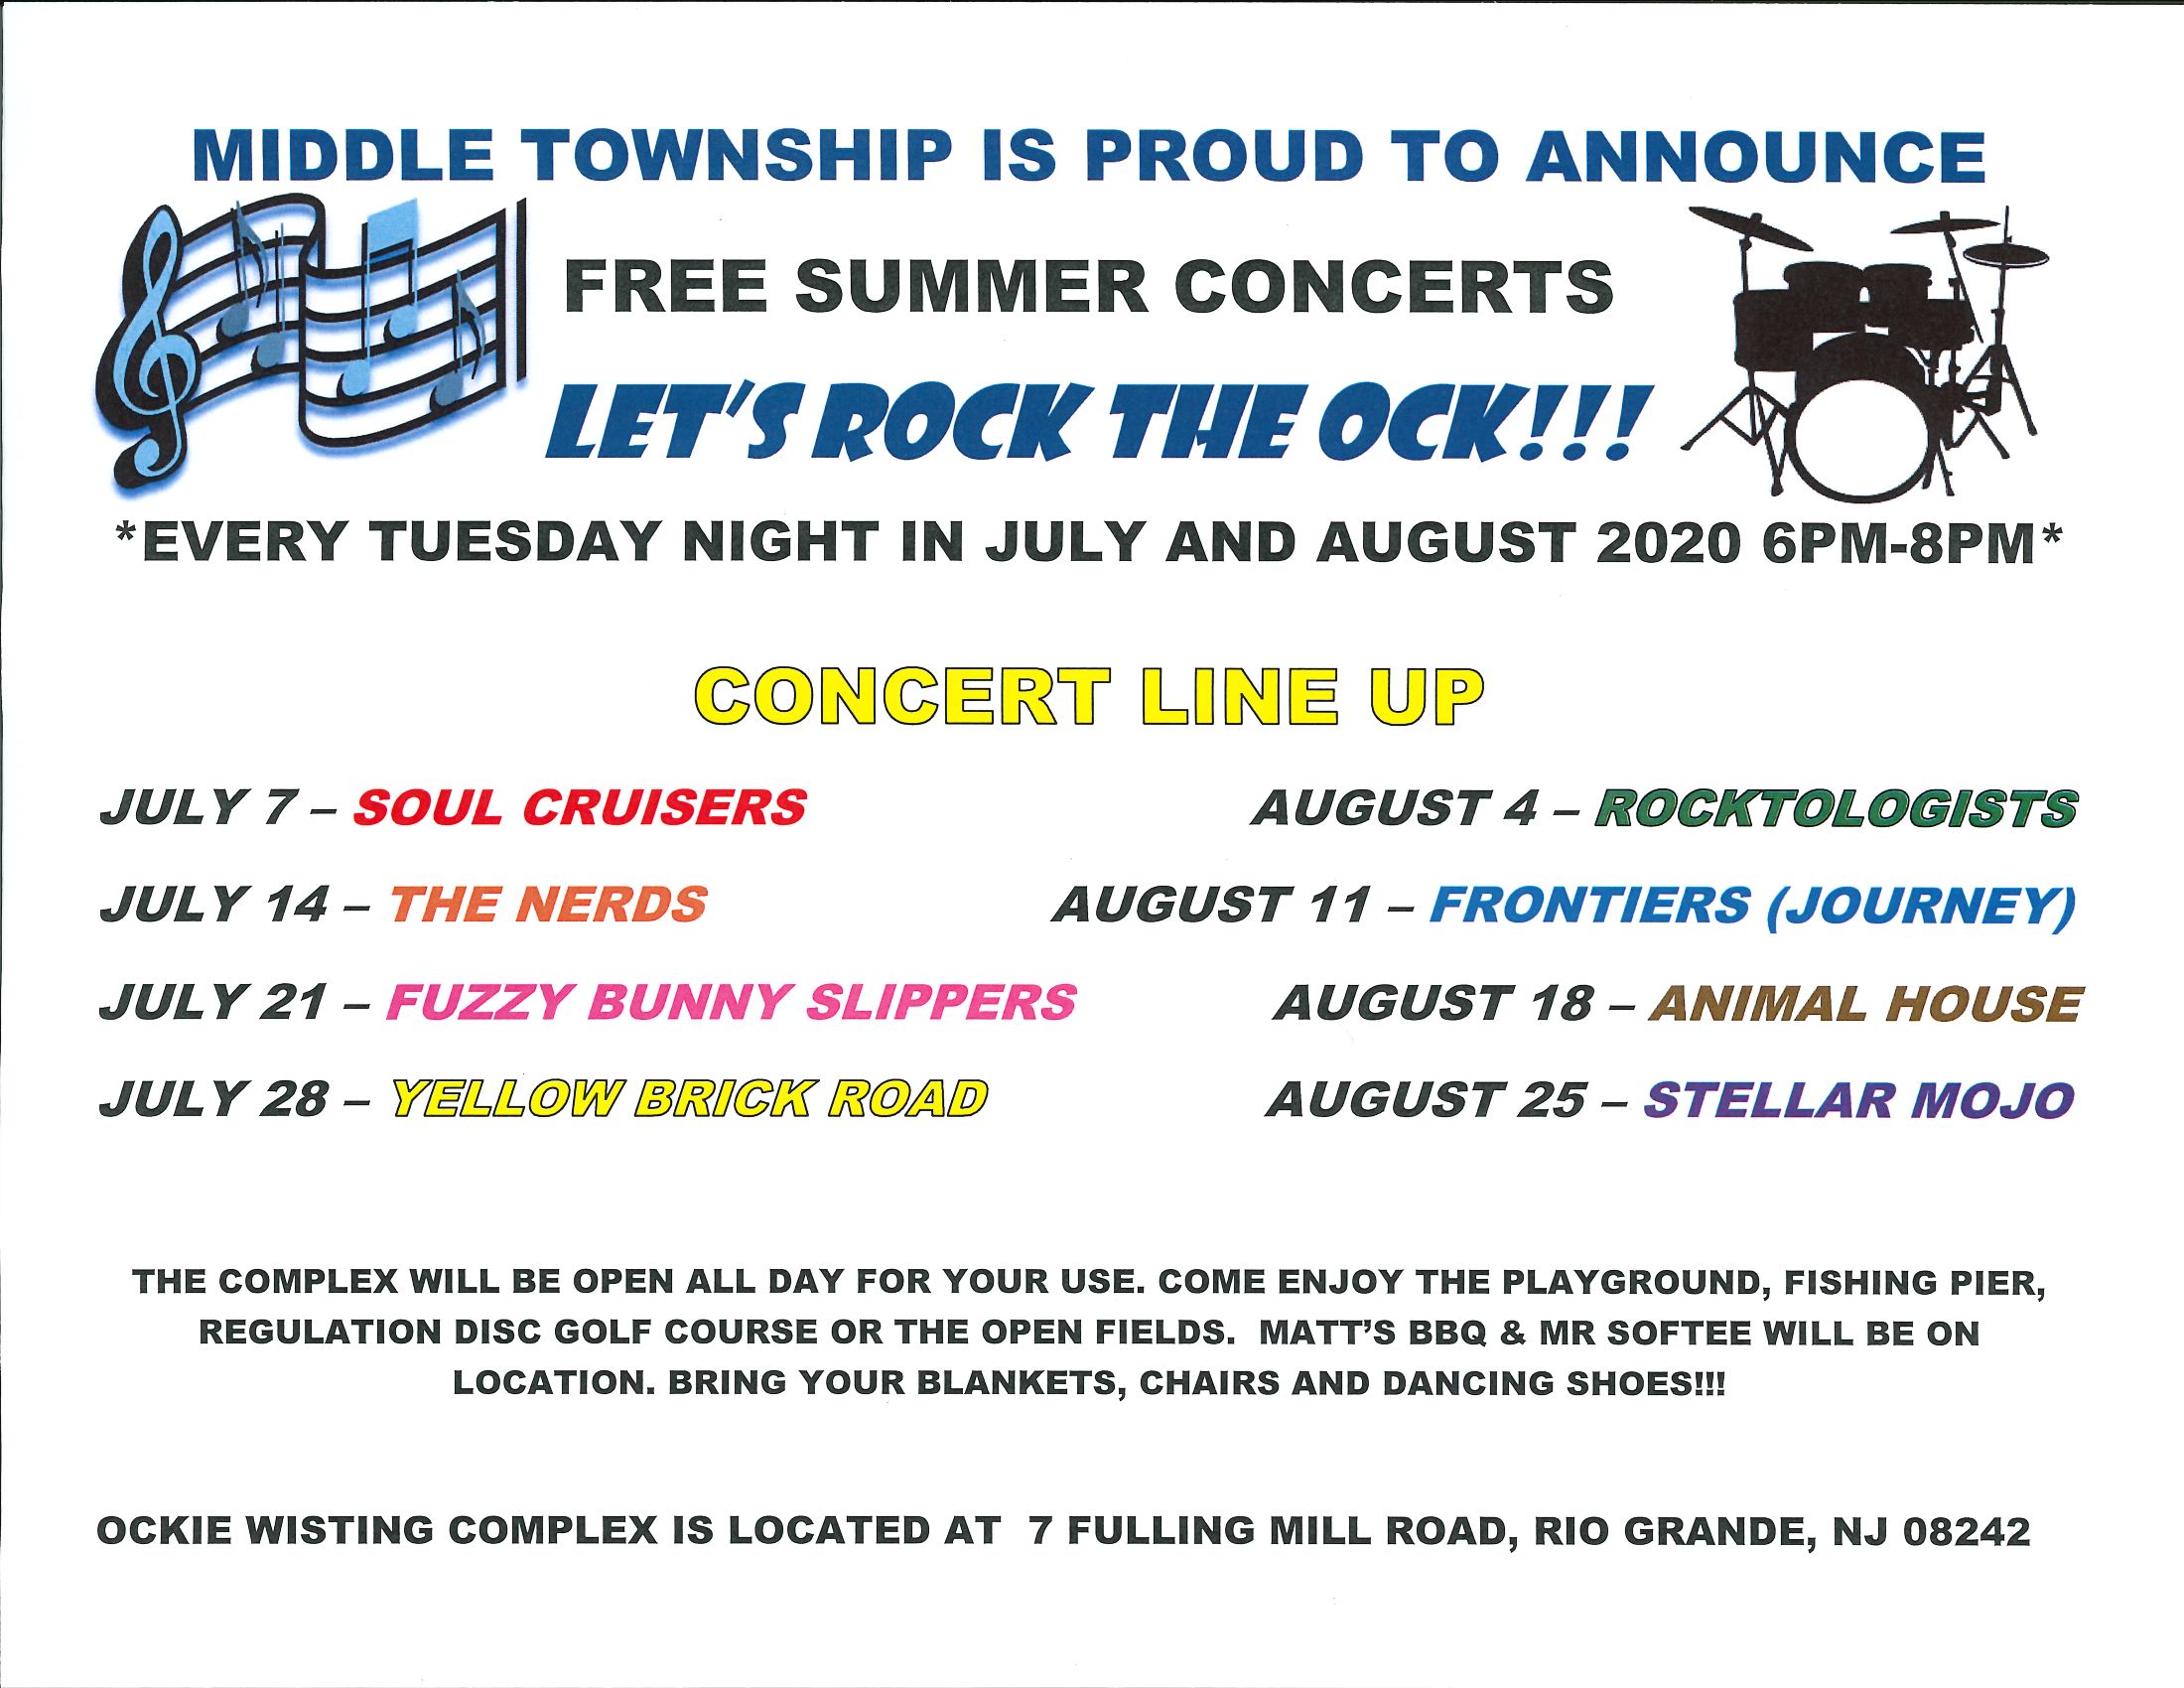 Free Summer Concert Tuesday July 28th 6pm830pm "Yellow Brick Road